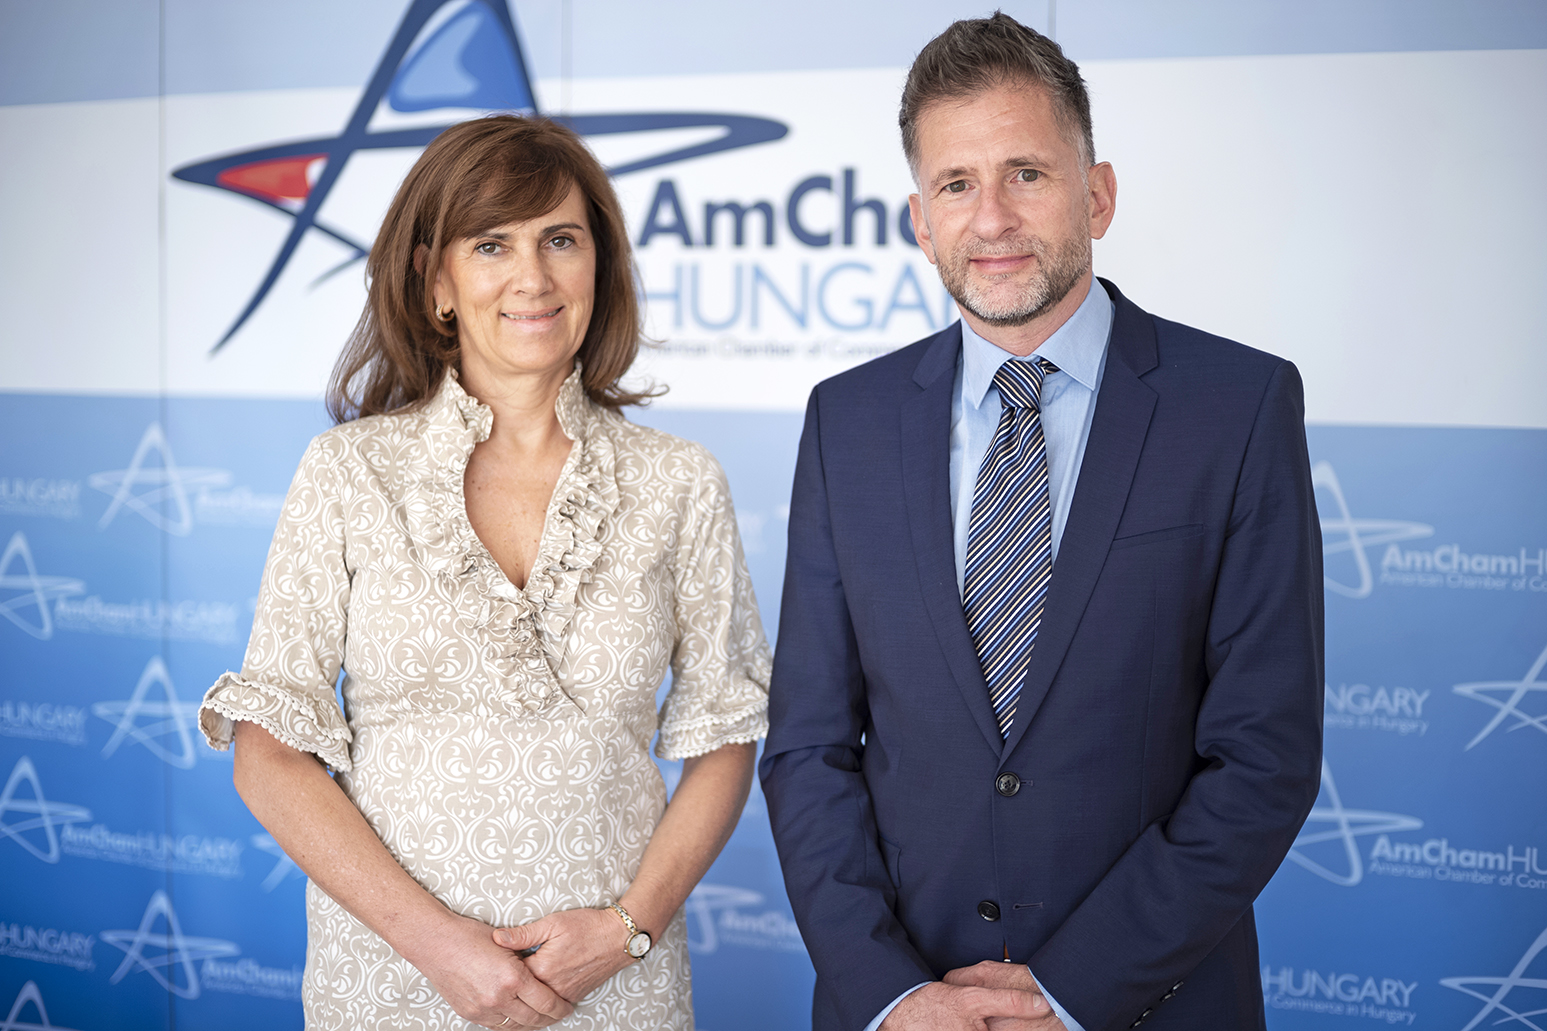 AmCham: Building Relevance by Adding Value